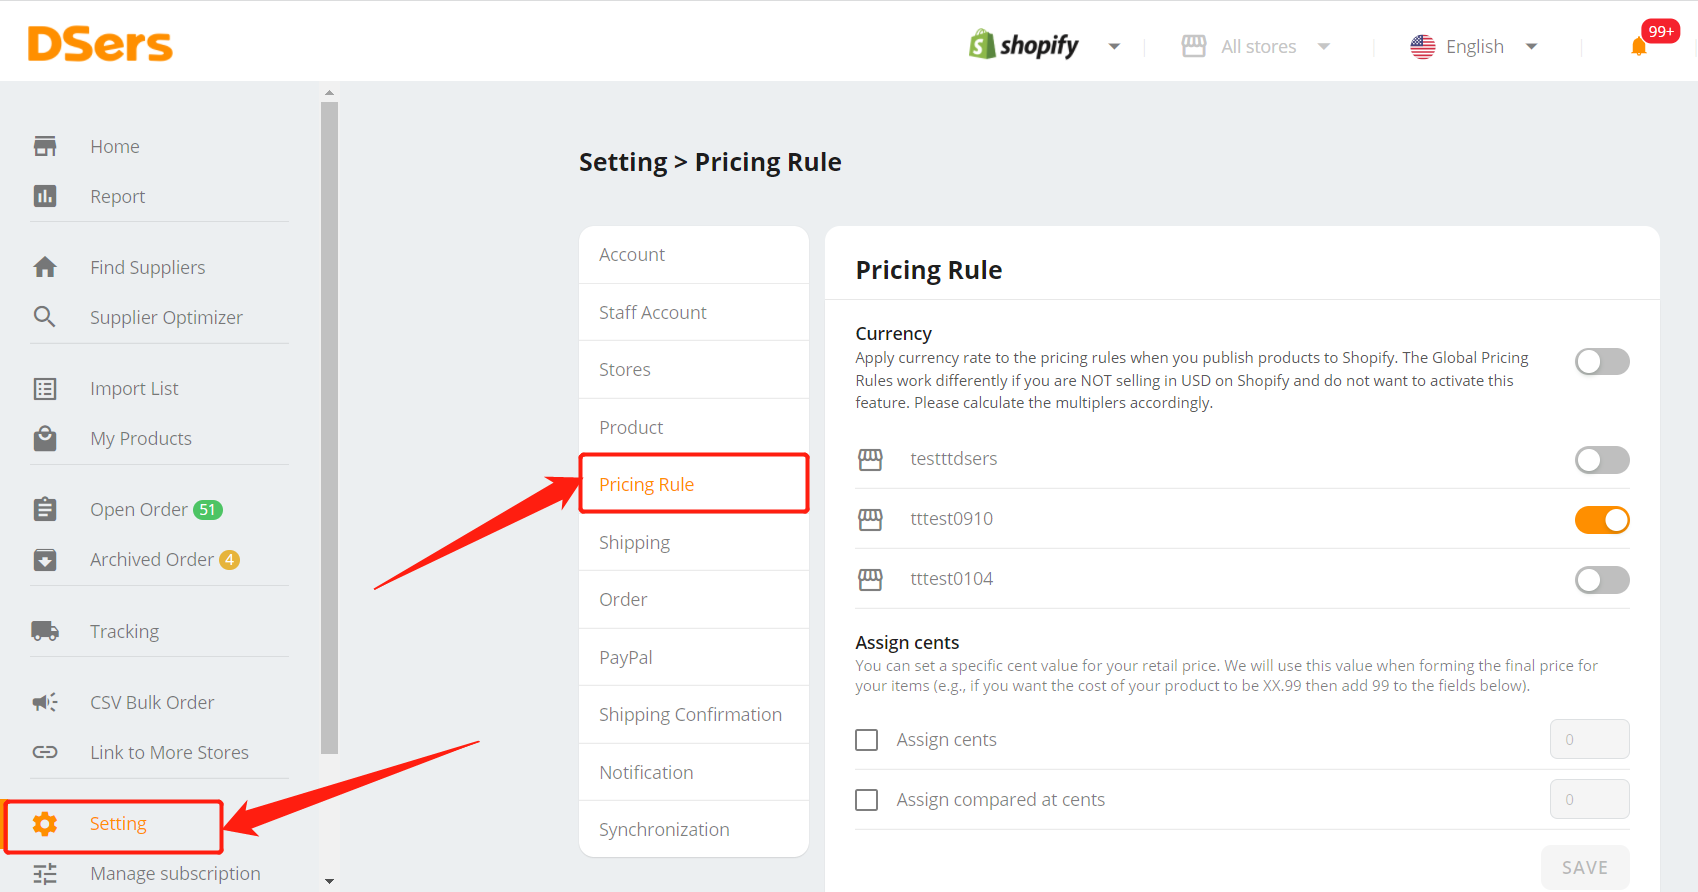 Basic Pricing Rule - Setting Pricing Rule - DSers